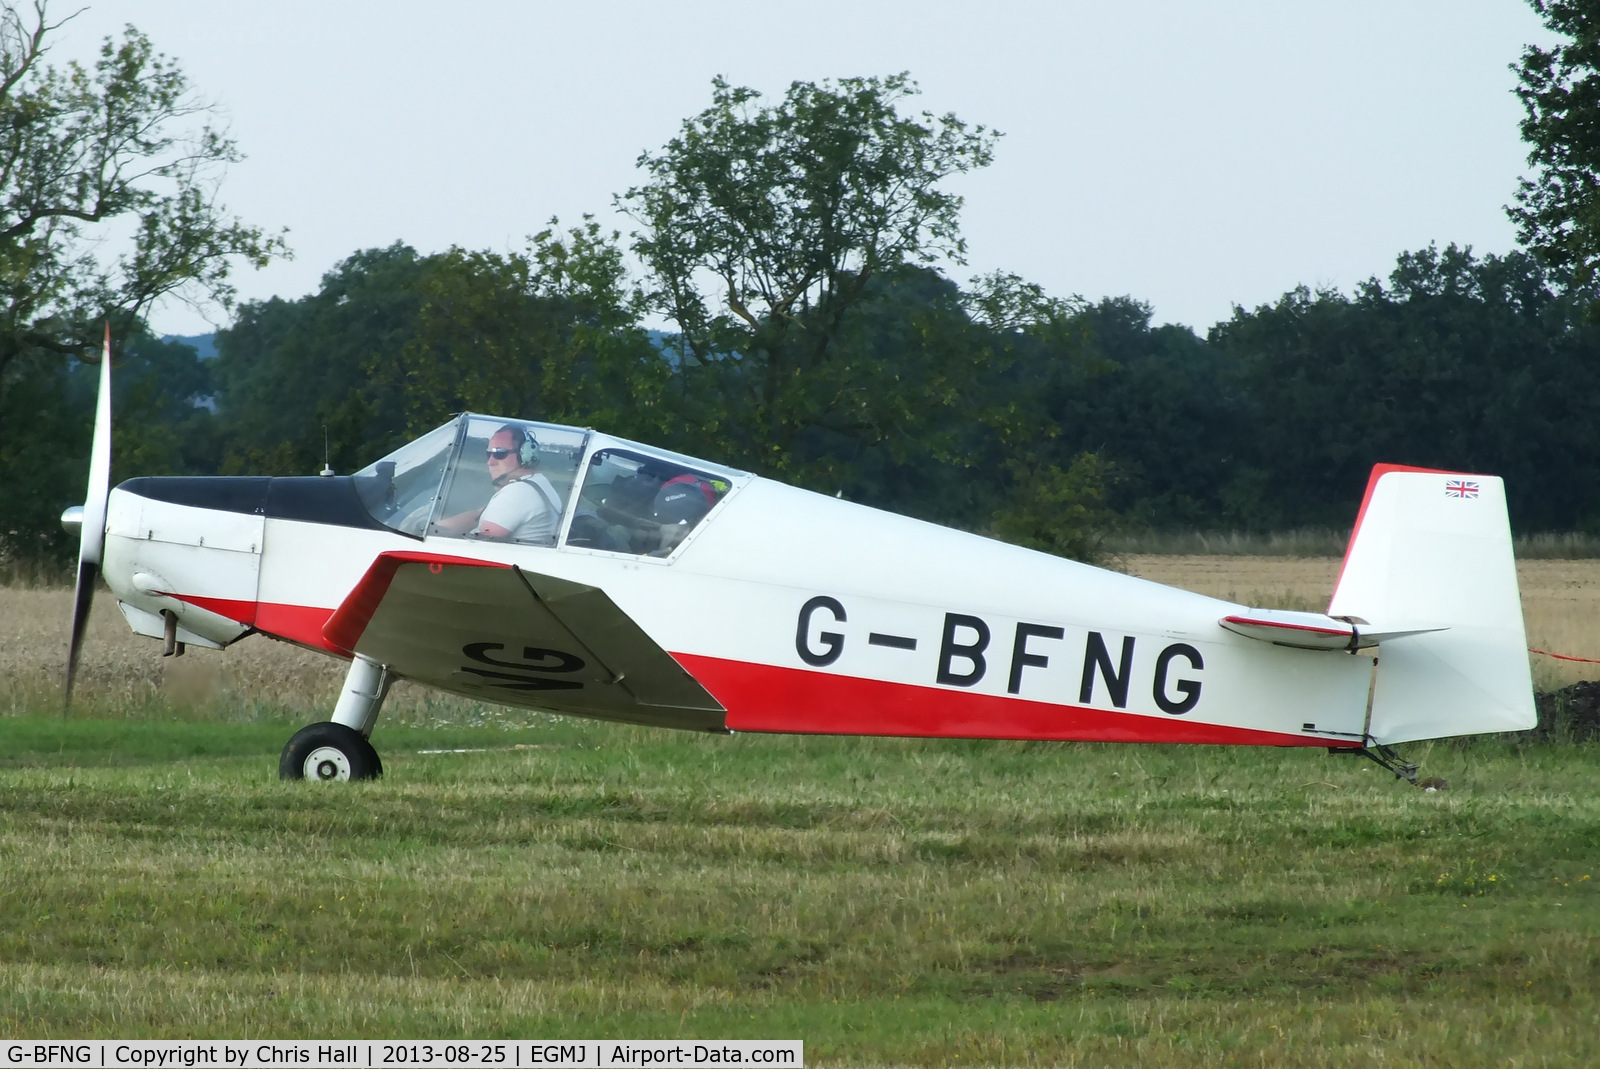 G-BFNG, 1966 Jodel D-112 C/N 1321, at the Little Gransden Air & Vintage Vehicle Show